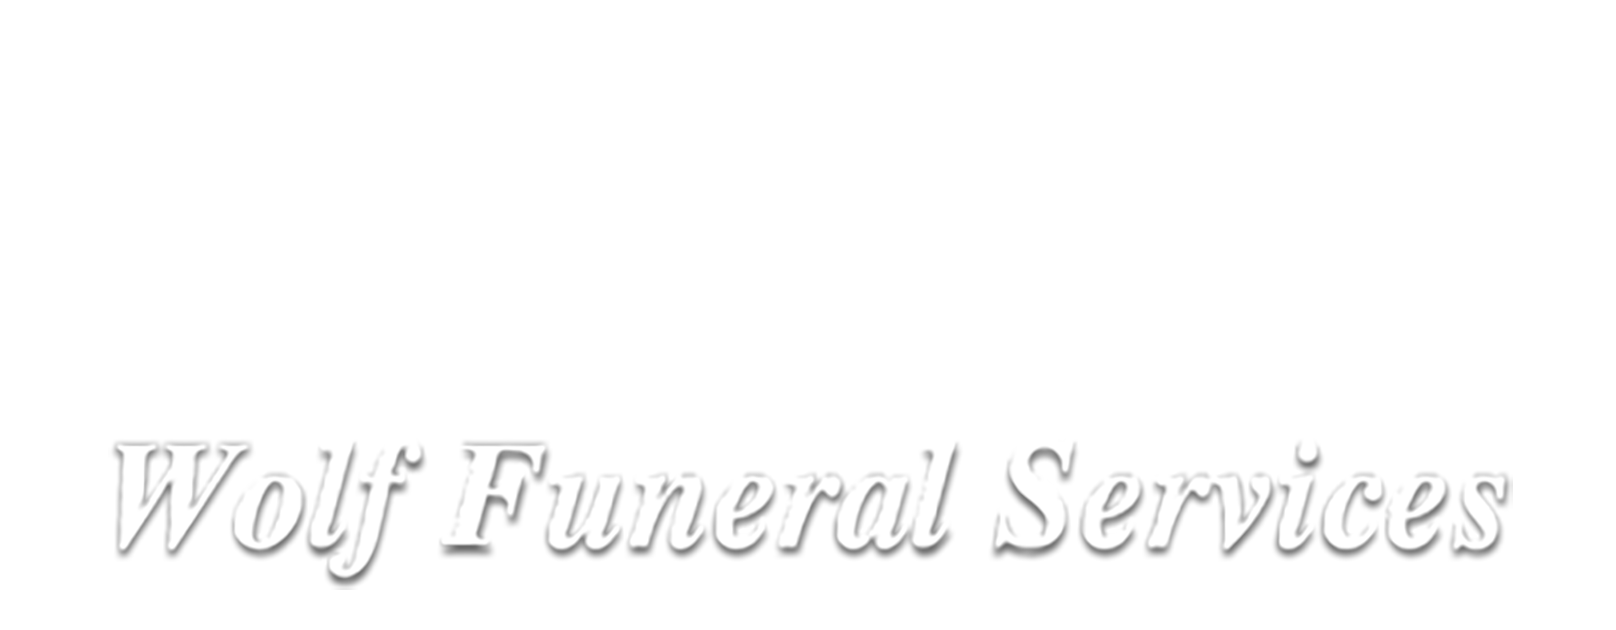 Wolf Funeral Services Logo